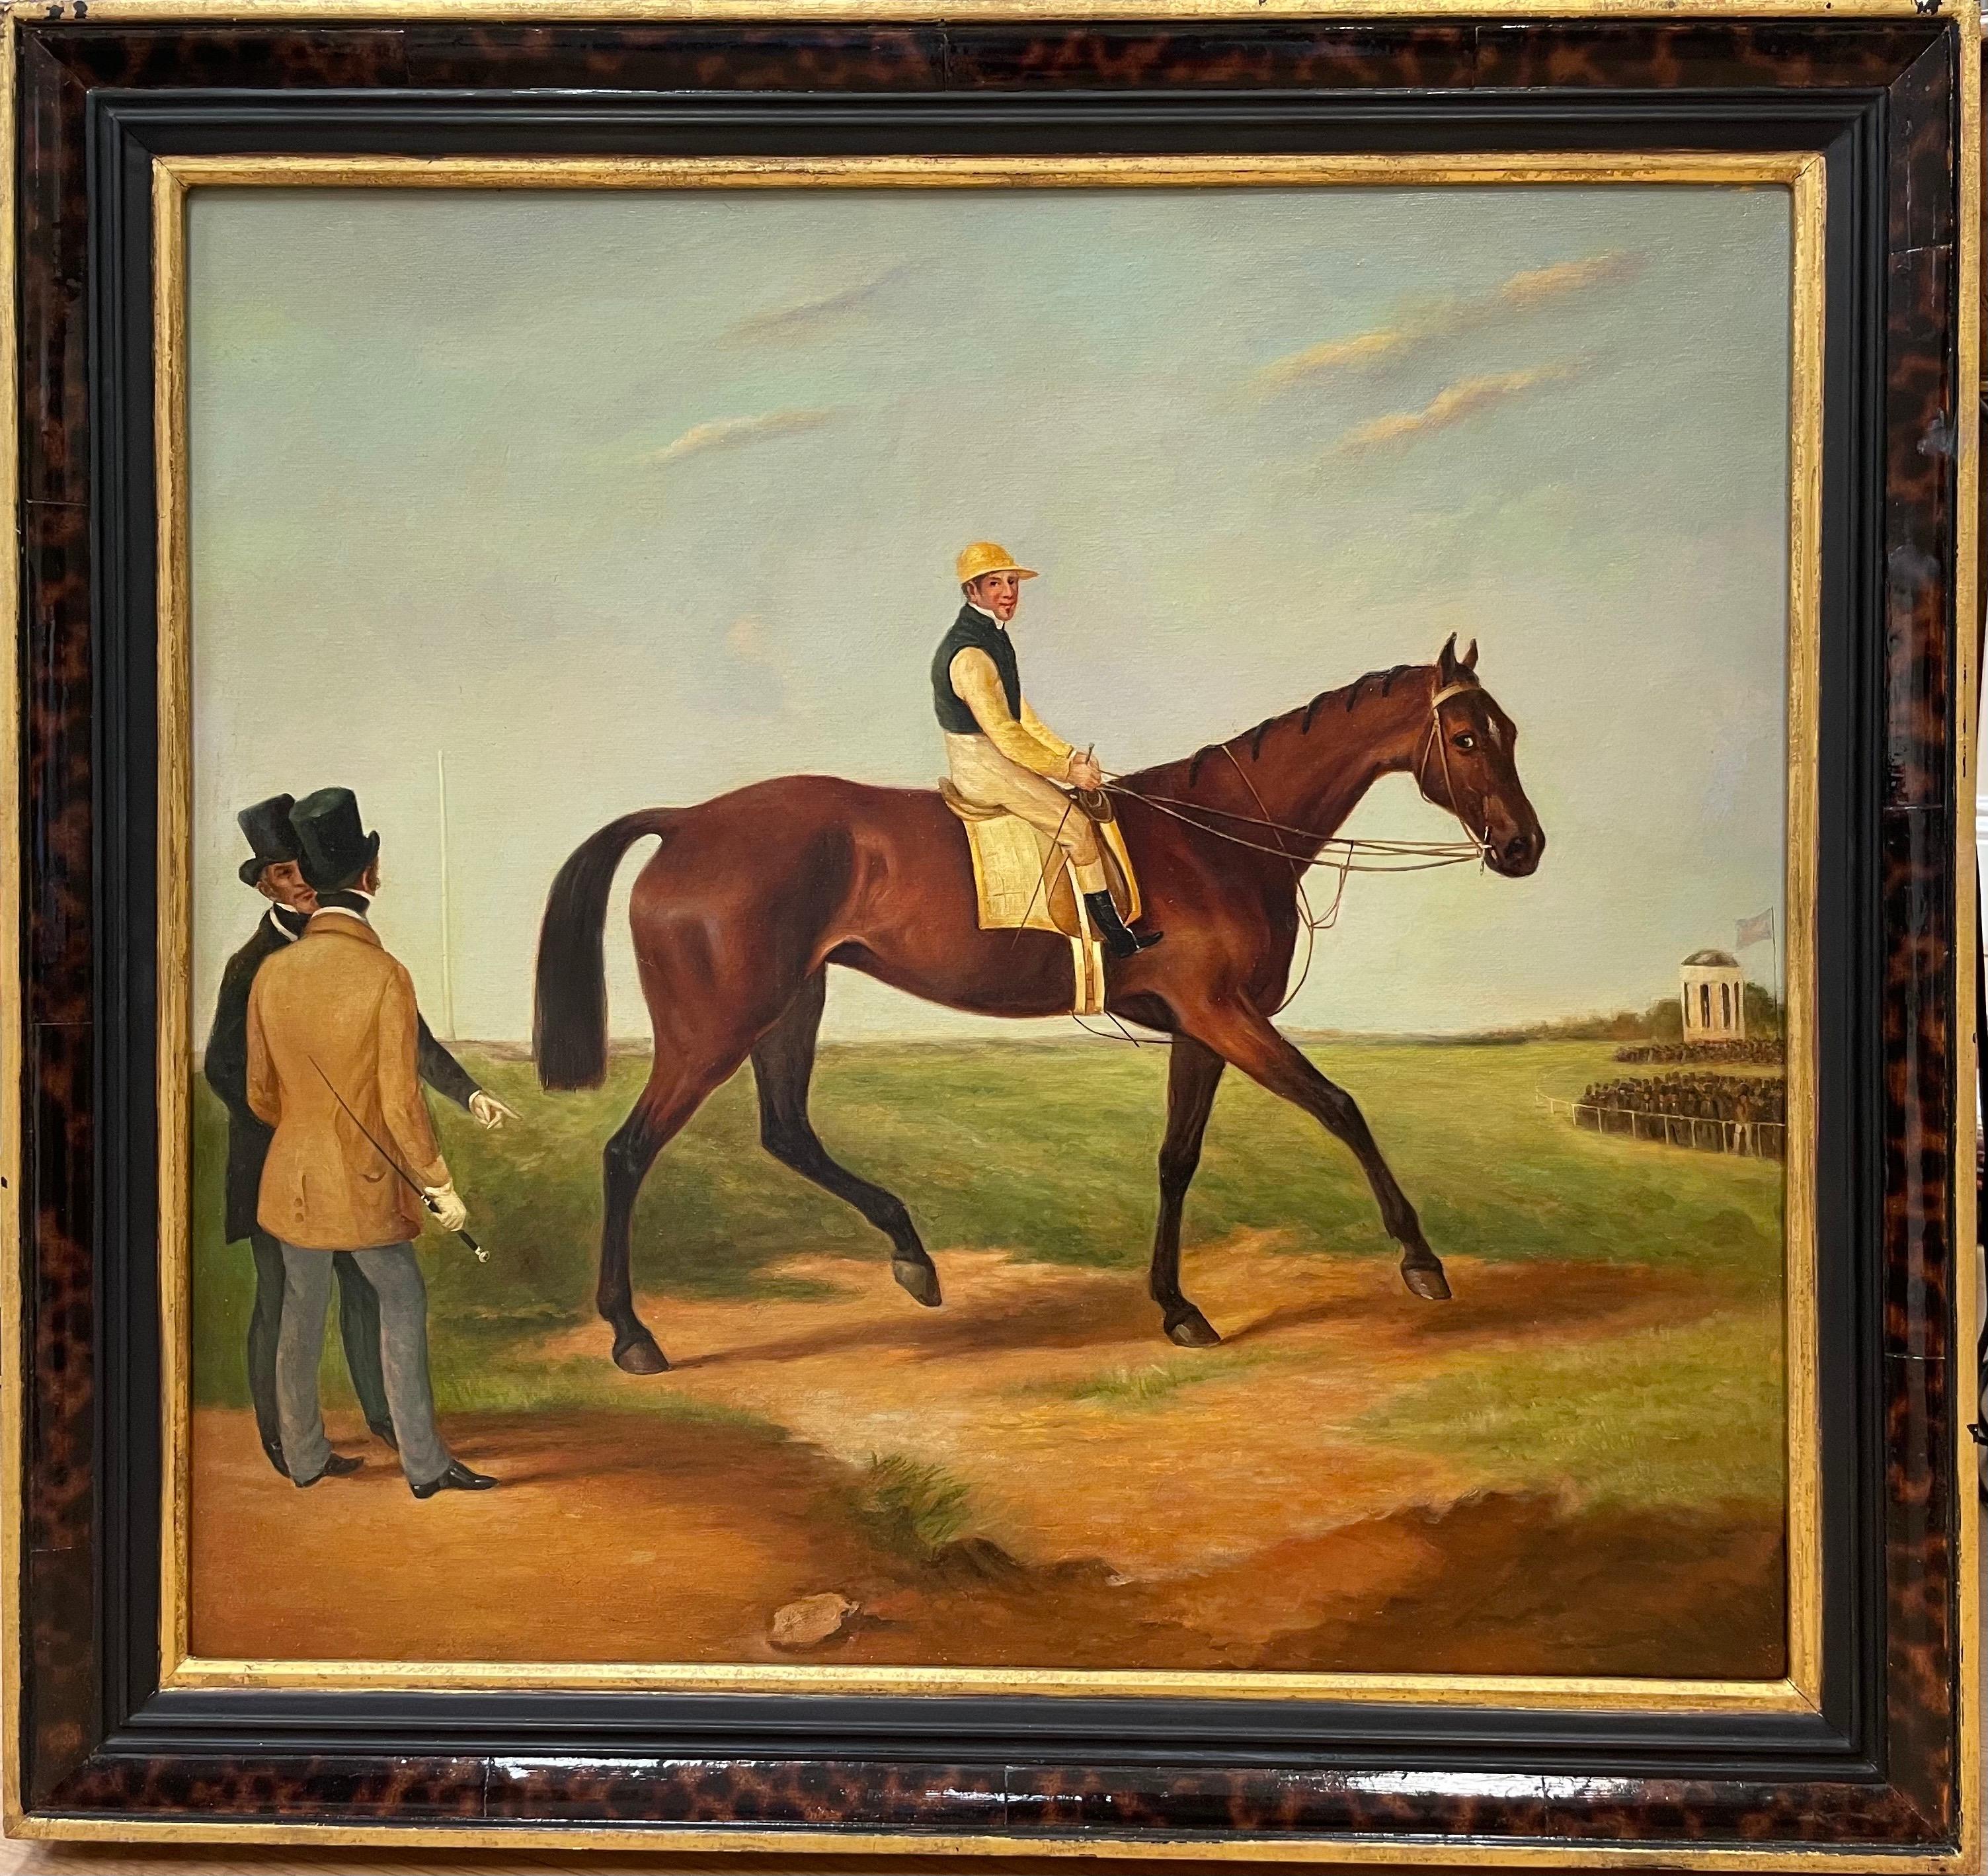 Fine Classic British Sporting Art Oil Painting - Racehorse with Jockey & Trainer - Beige Figurative Painting by Unknown